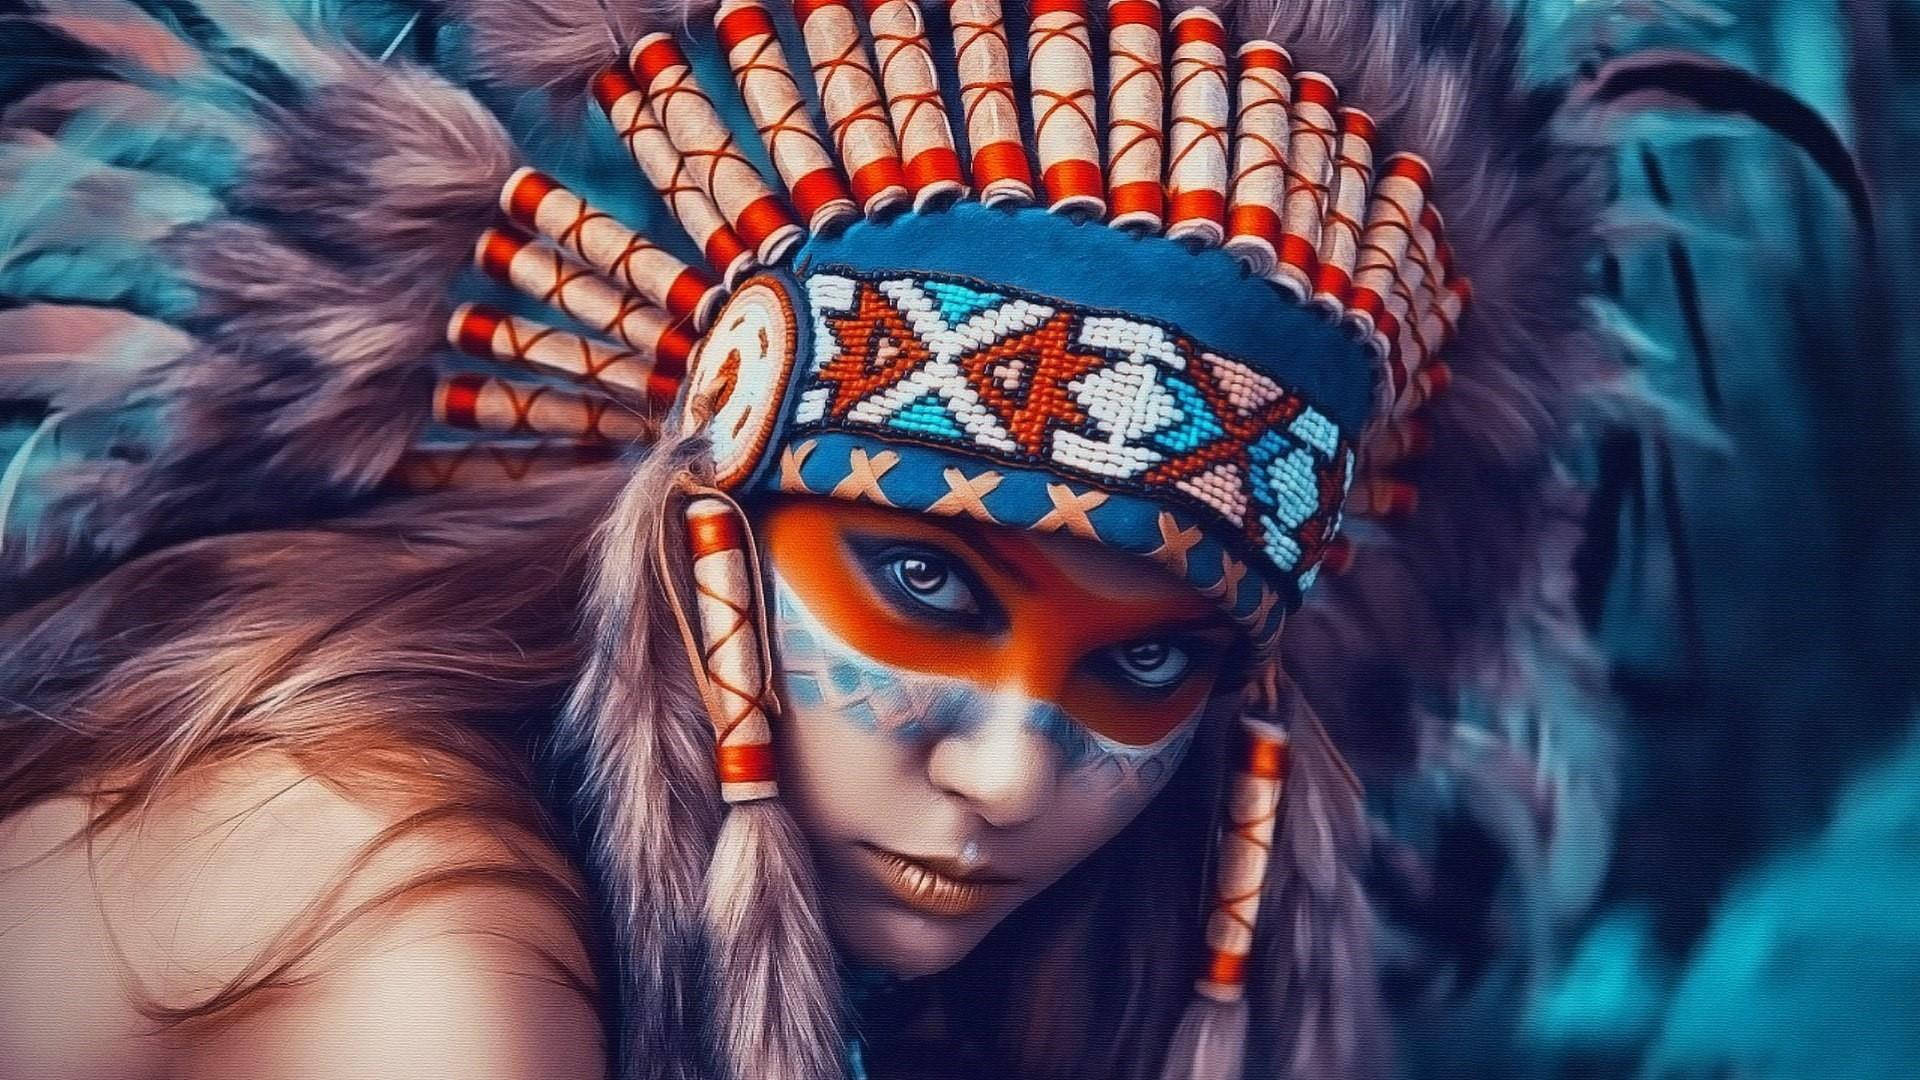 Woman's Face Wearing Native Headpiece Background